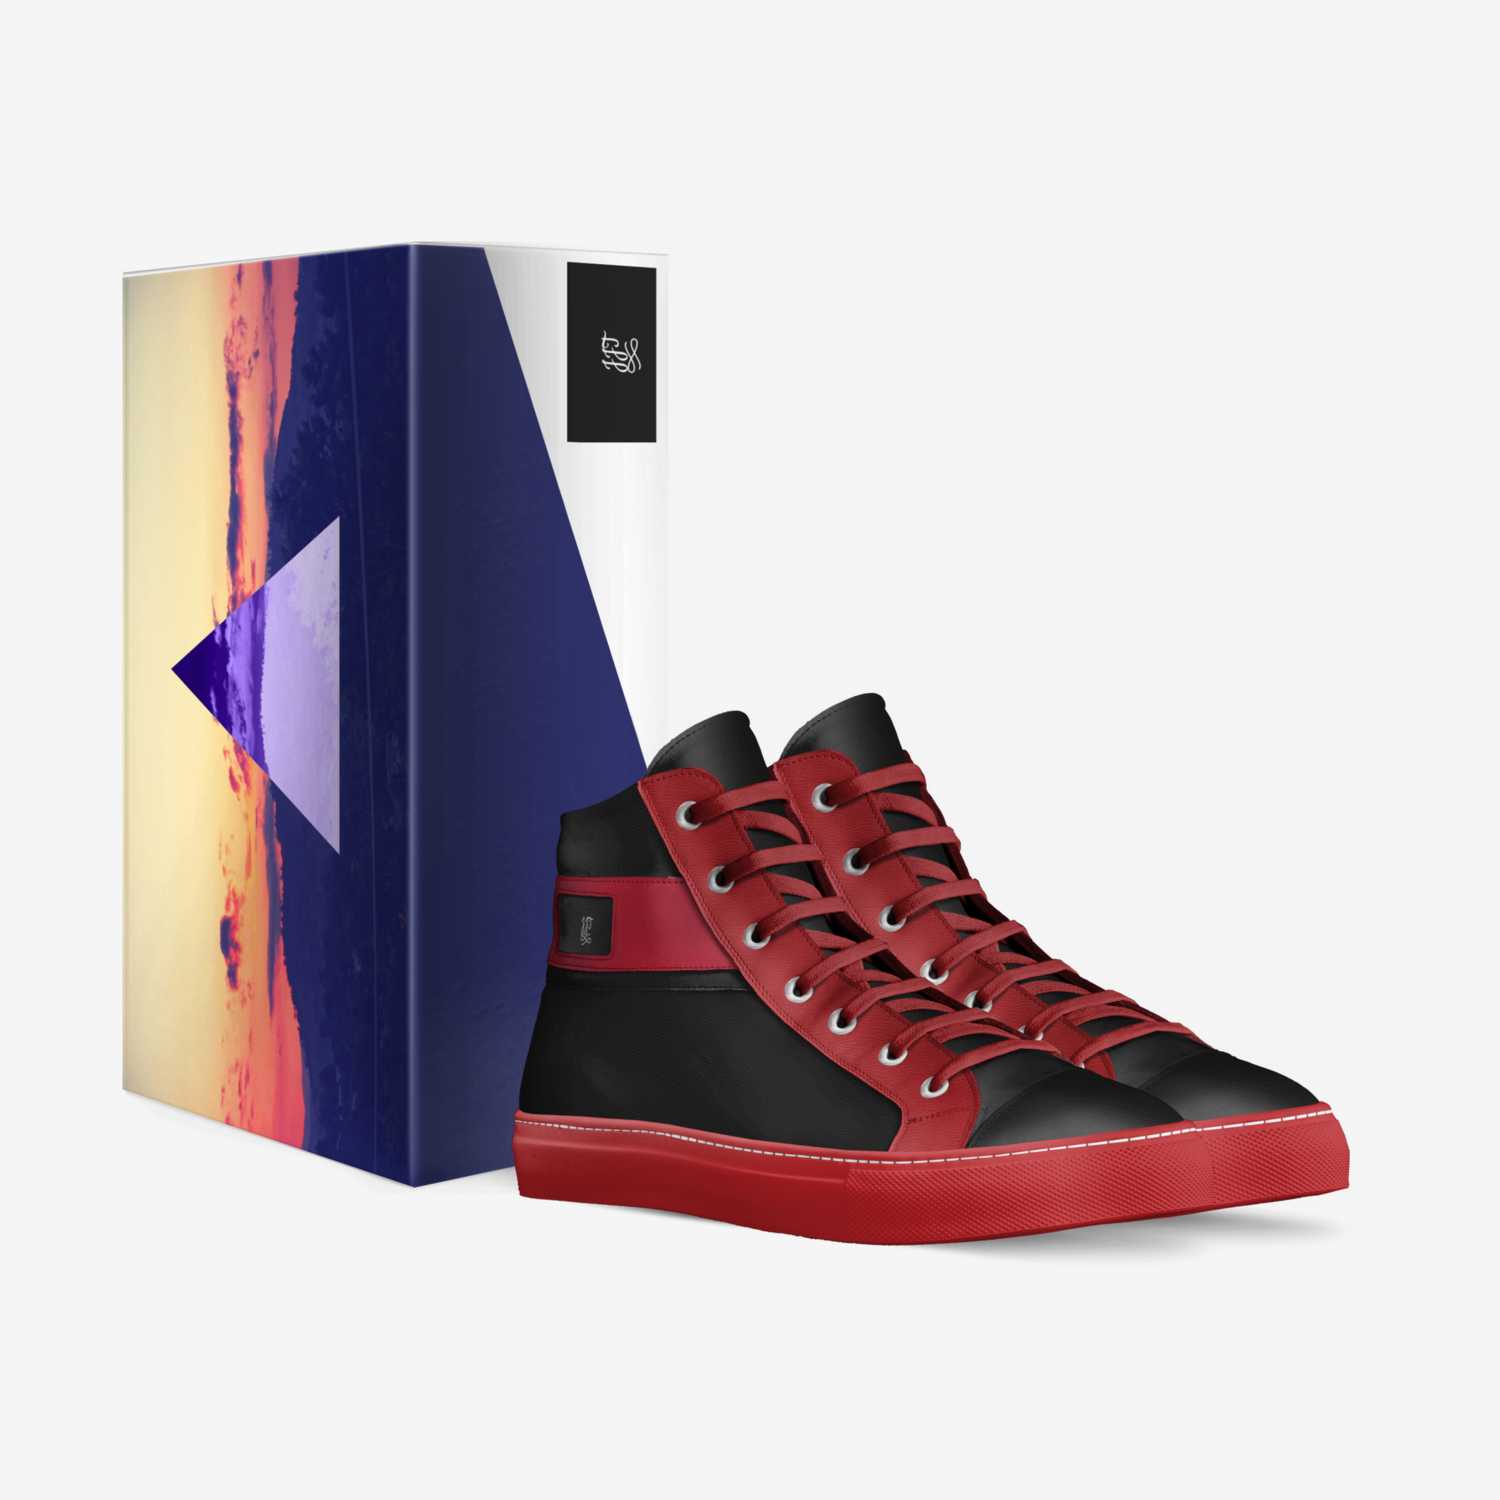 JJT custom made in Italy shoes by Jose Jared Tamez | Box view